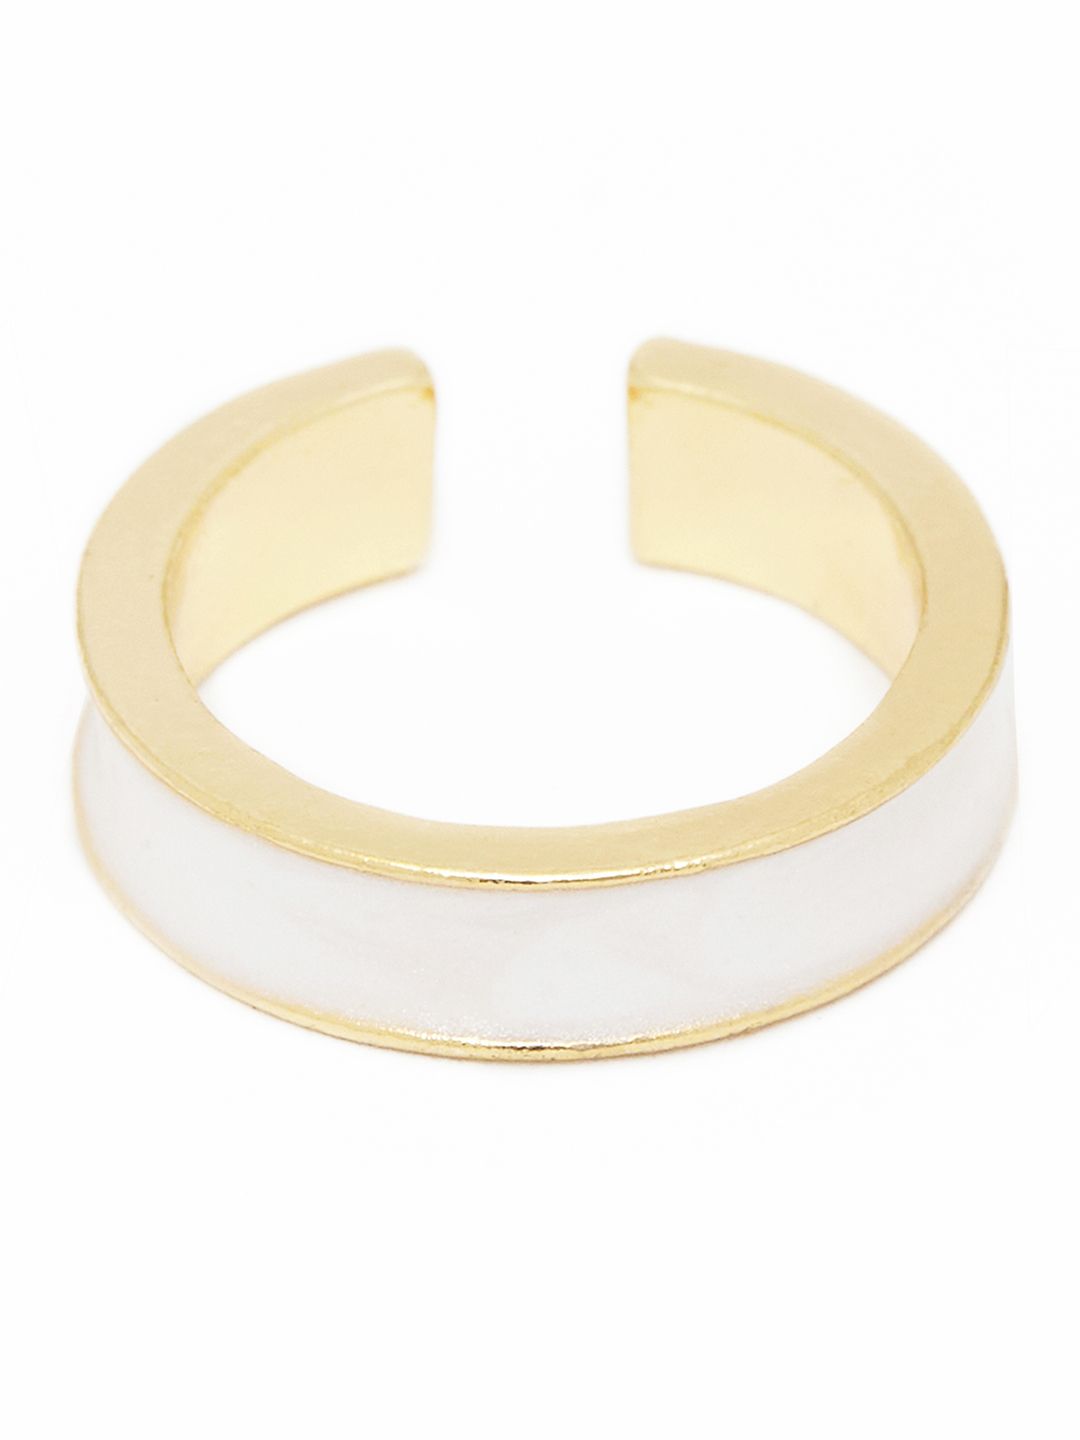 URBANIC  Gold-Toned & Off-White Classic Finger Ring Price in India